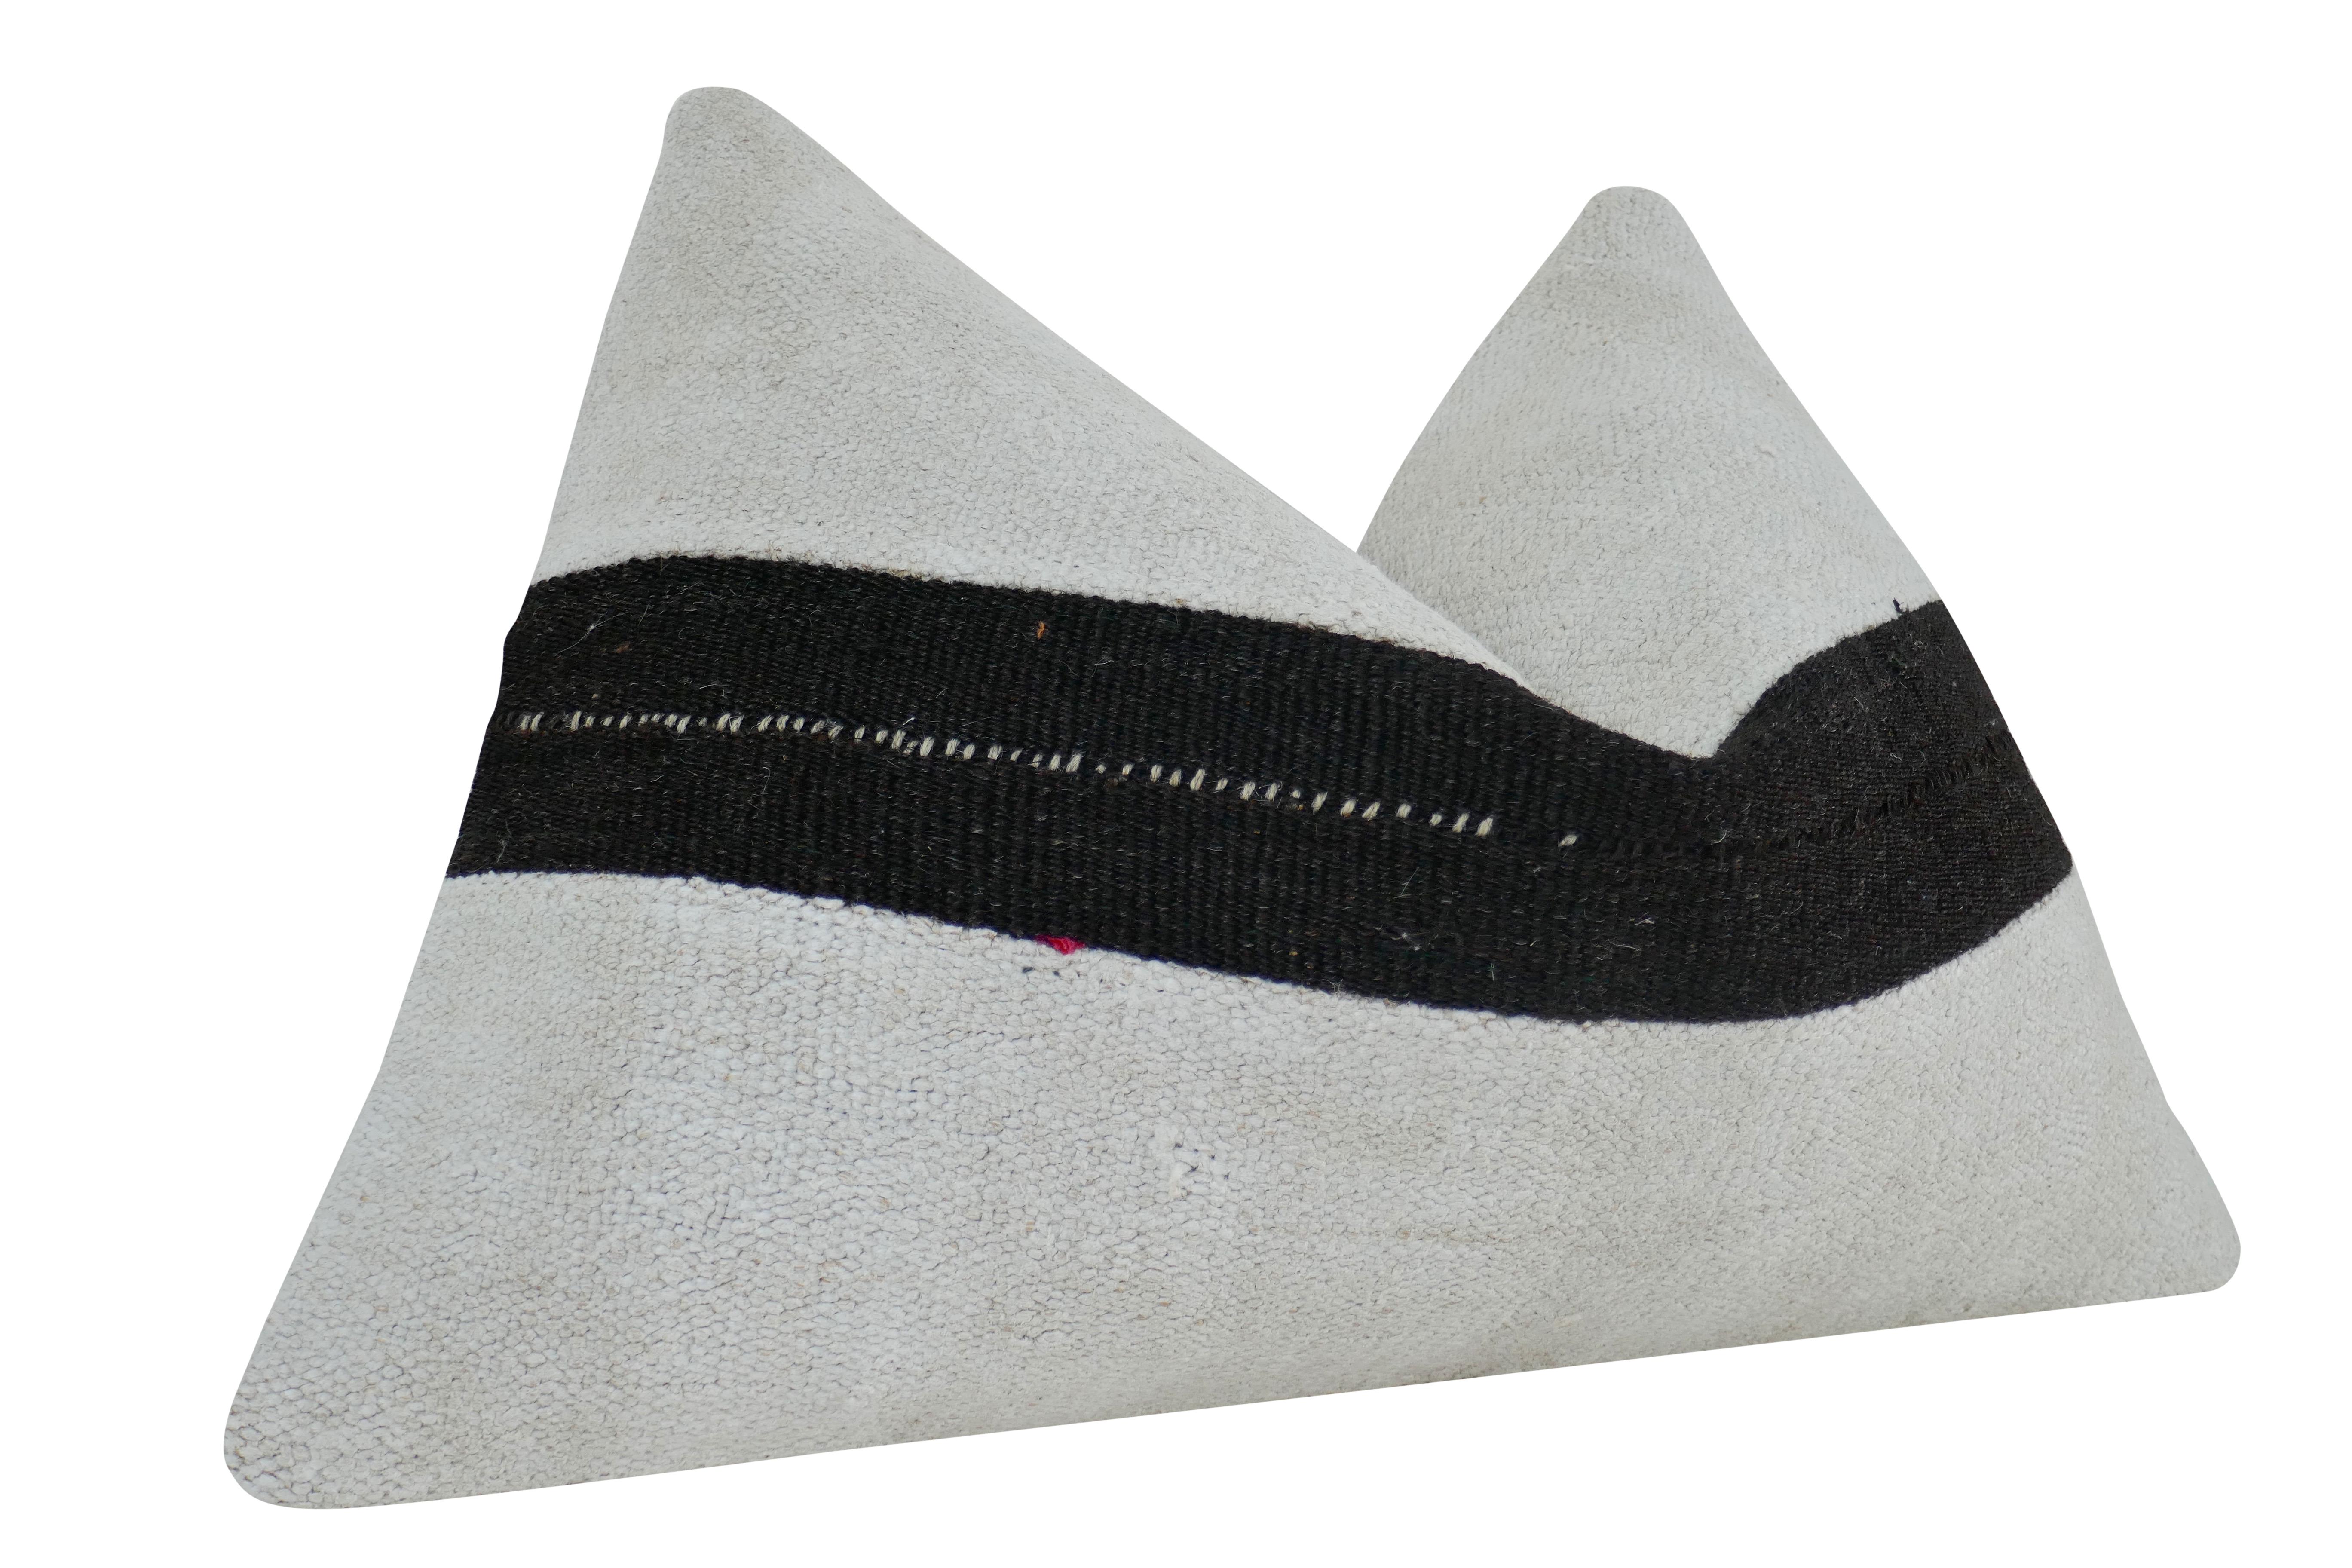 Vintage Kilim Berber Tribal Hemp & Wool Pillow. Authentic handwoven heavy textural natural organic hemp & wool in natural & black tone. Paired with our luxe premium white pure linen on reverse side. Plushly filled Ultra-Plump down-and-feather insert